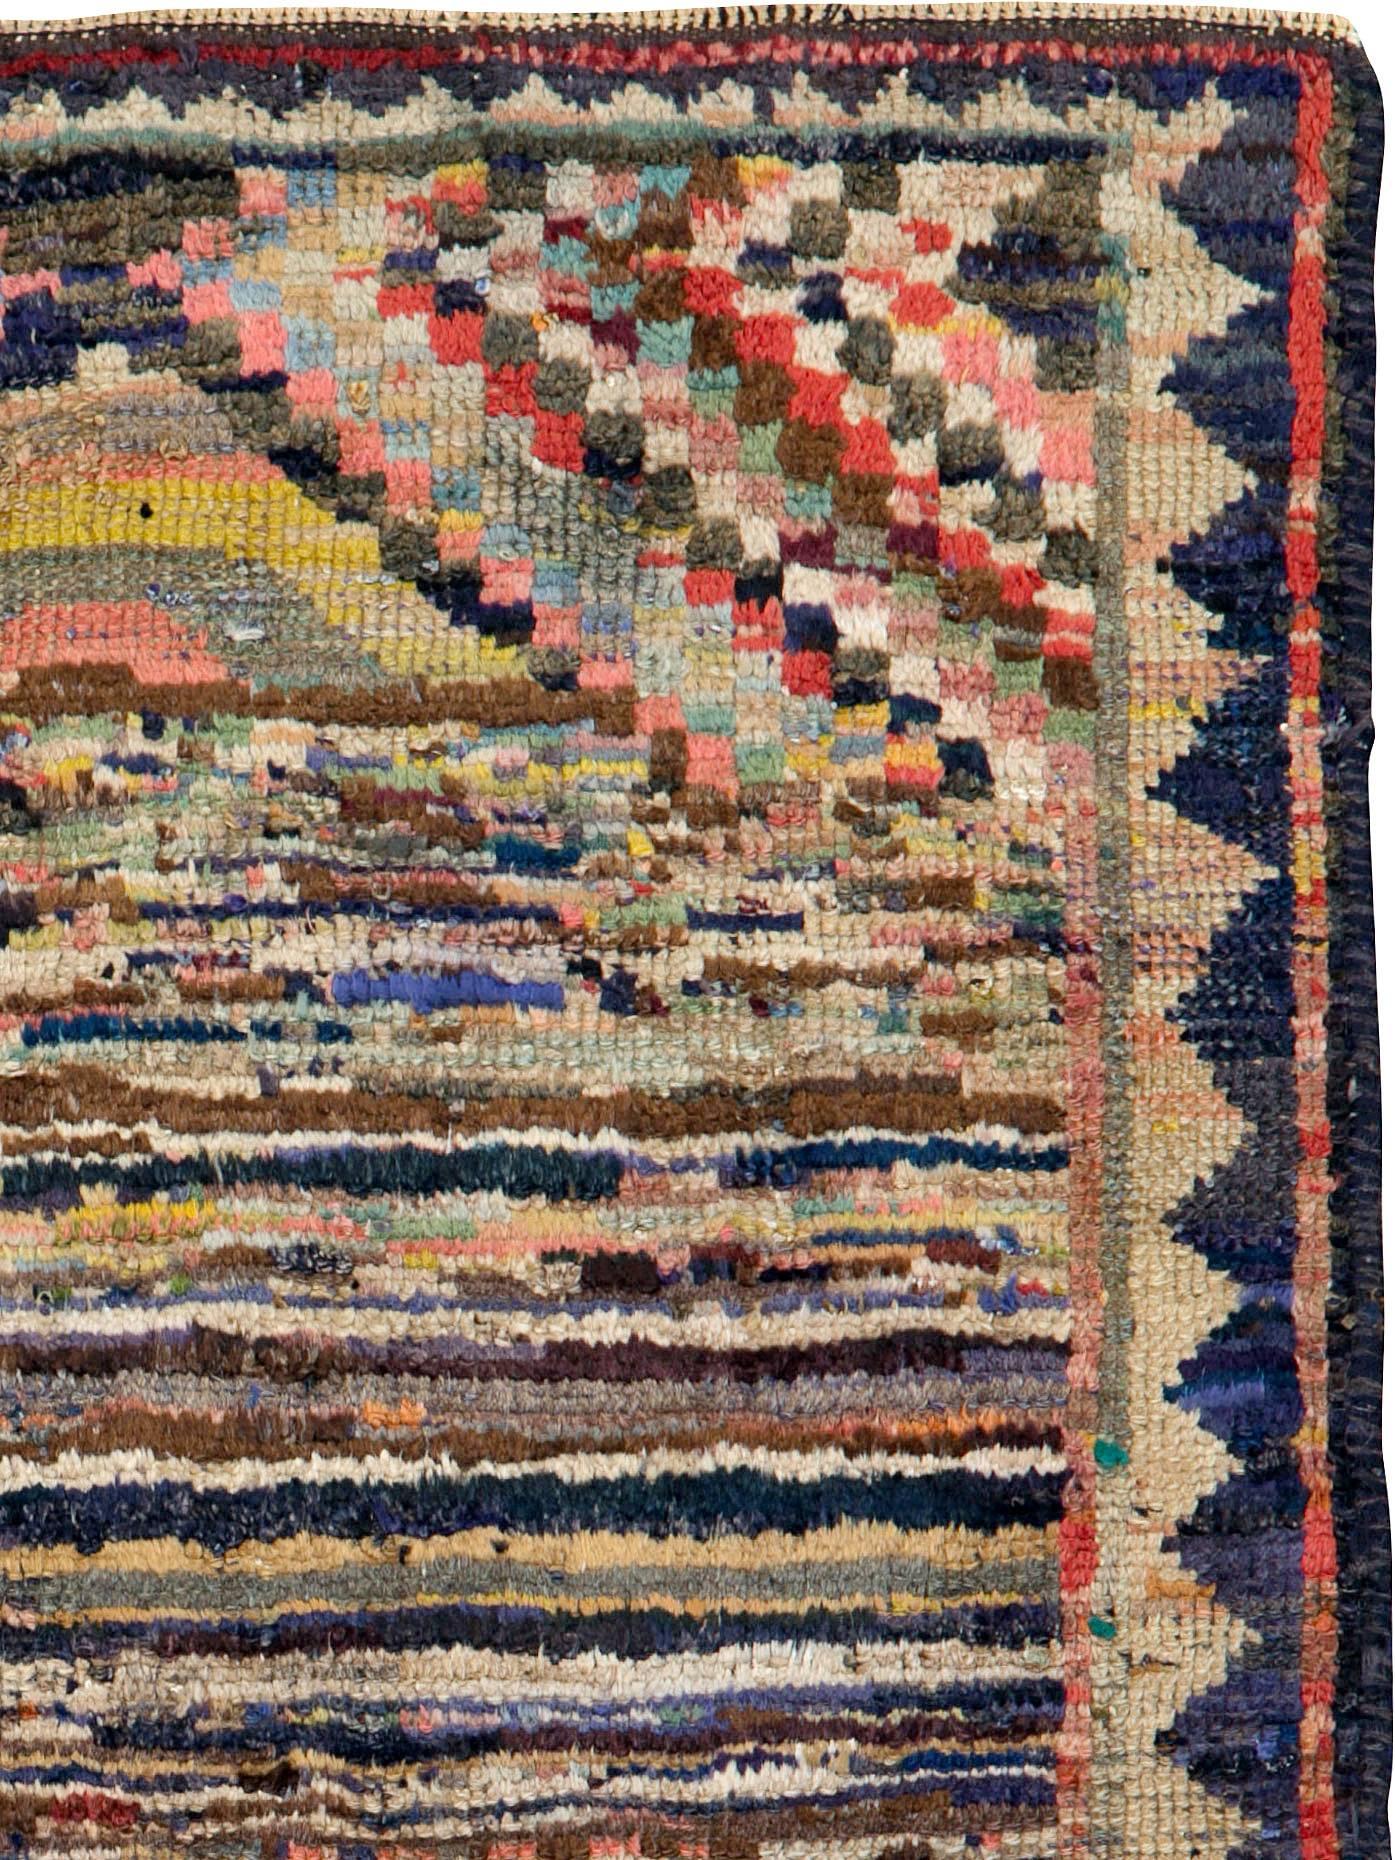 An antique Persian Gabbeh rug from the early 20th century.